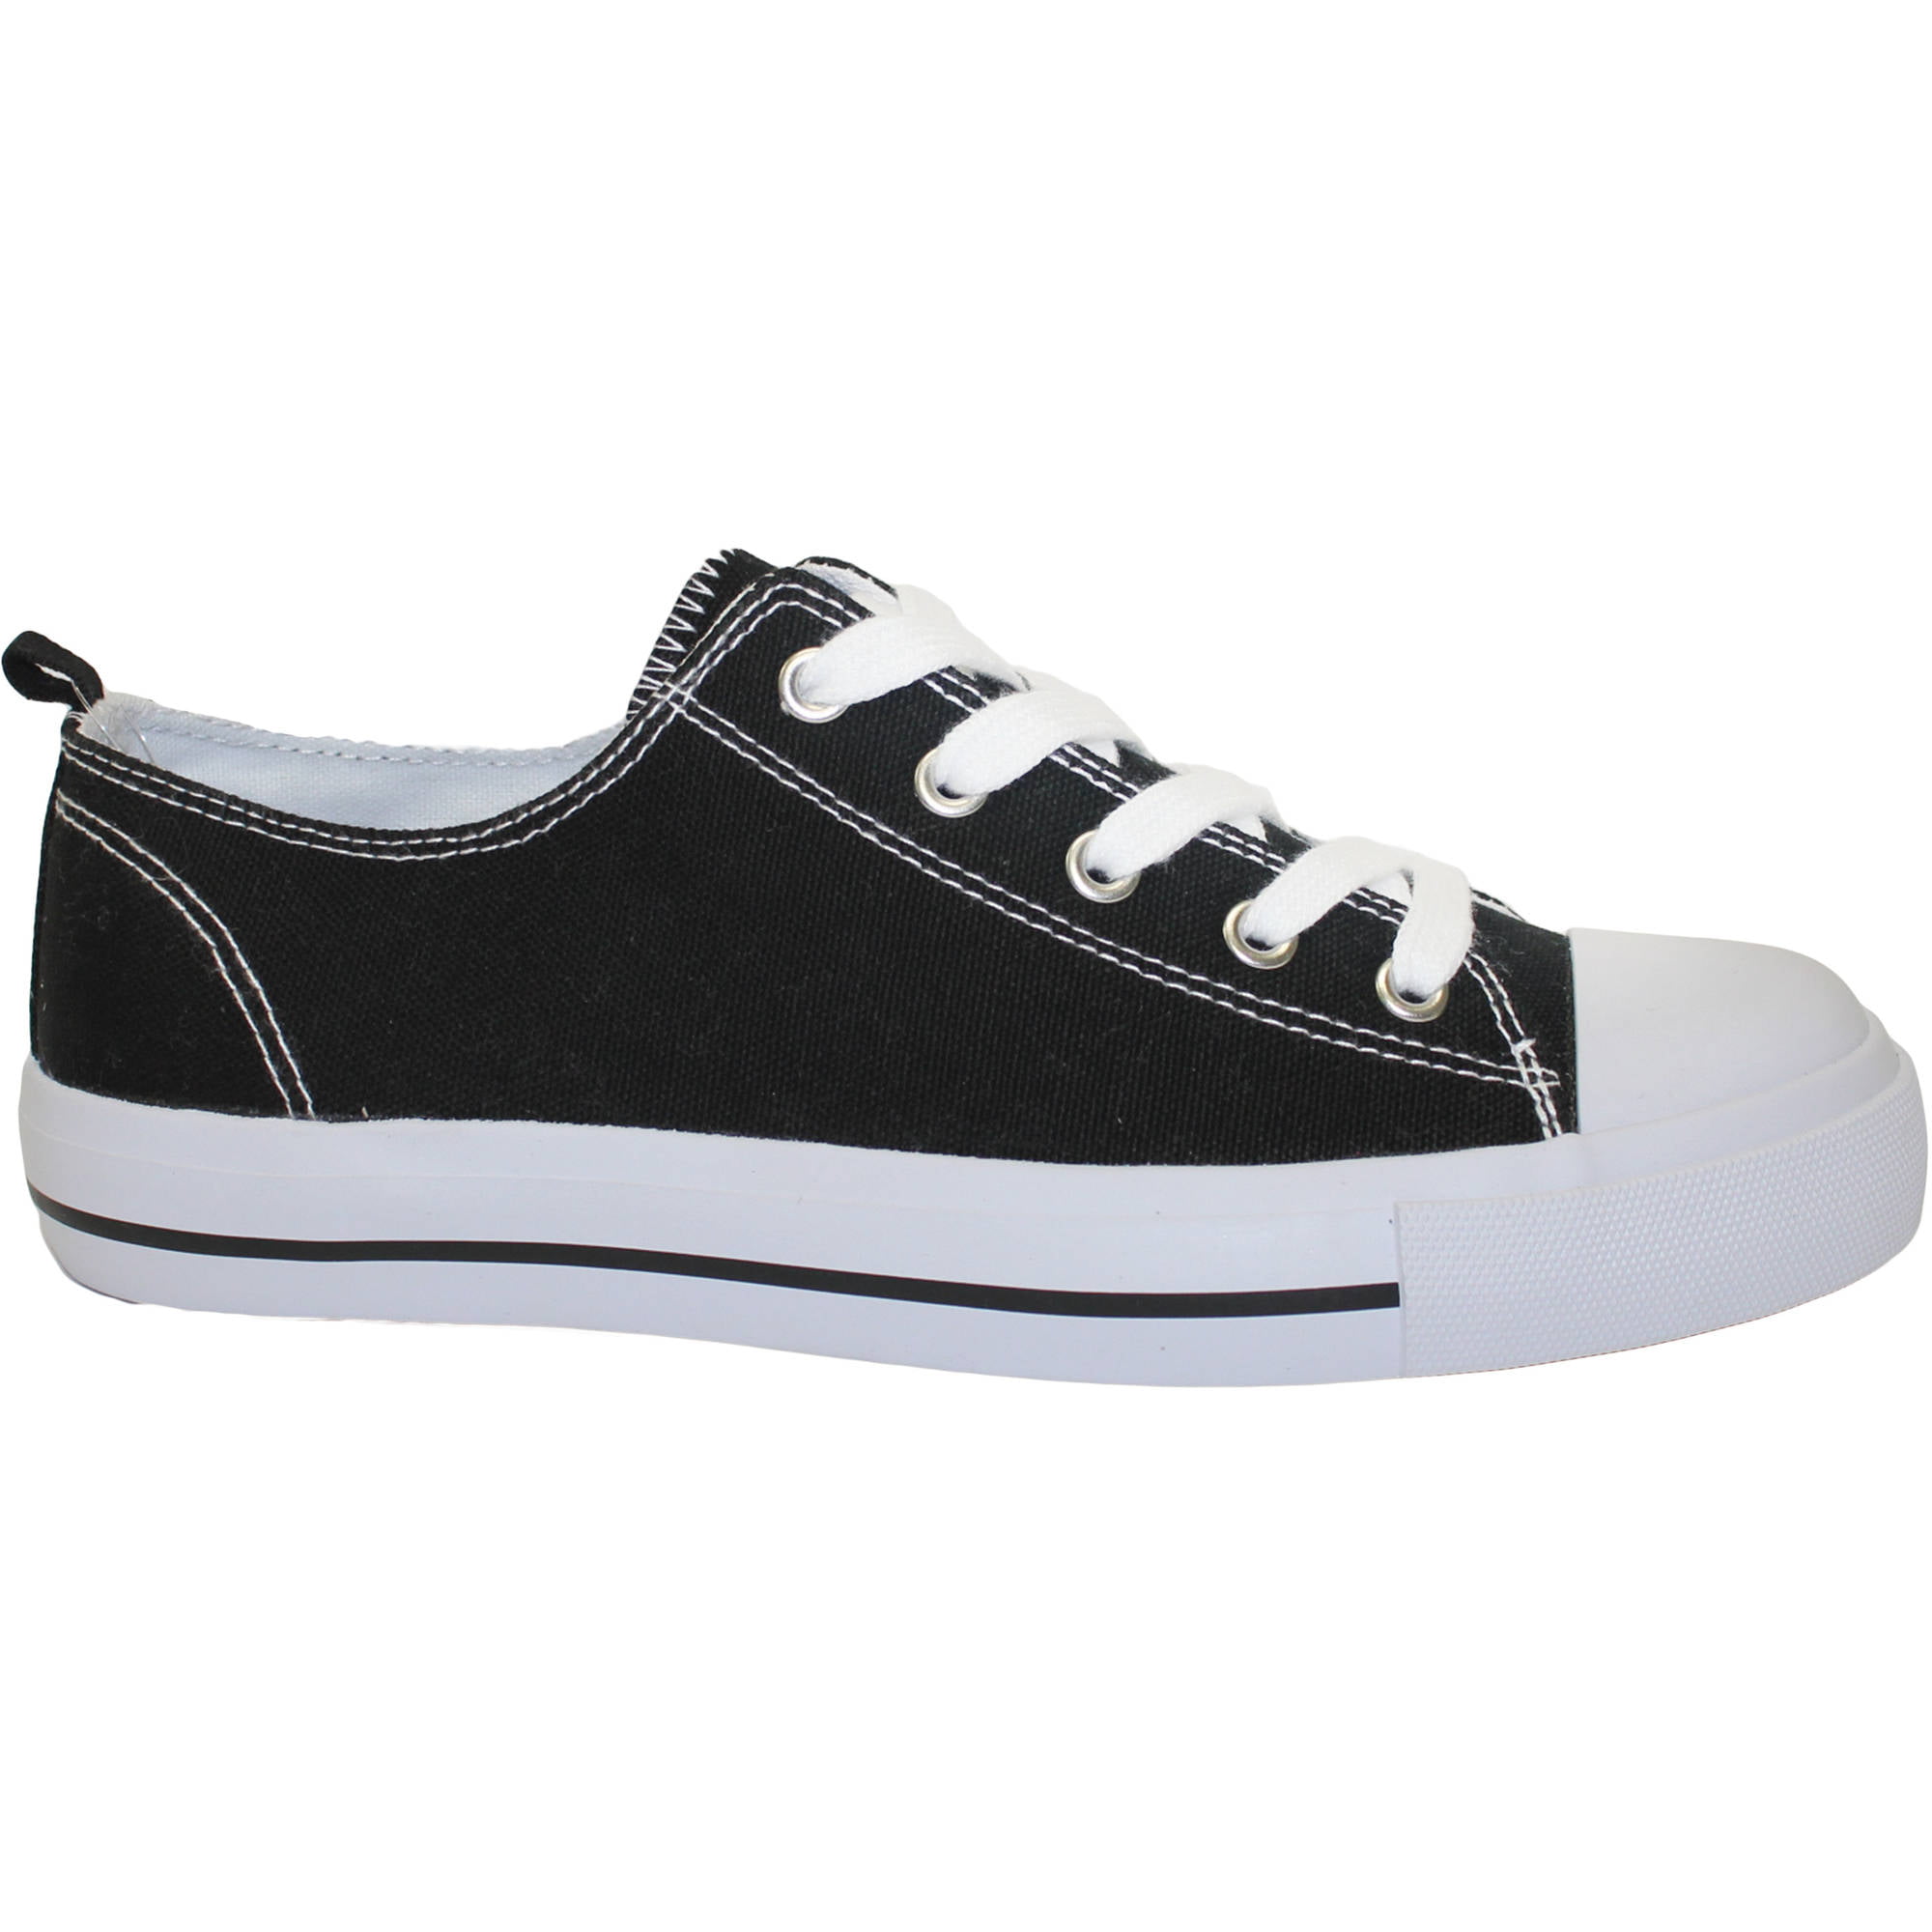 faded glory women's canvas shoes